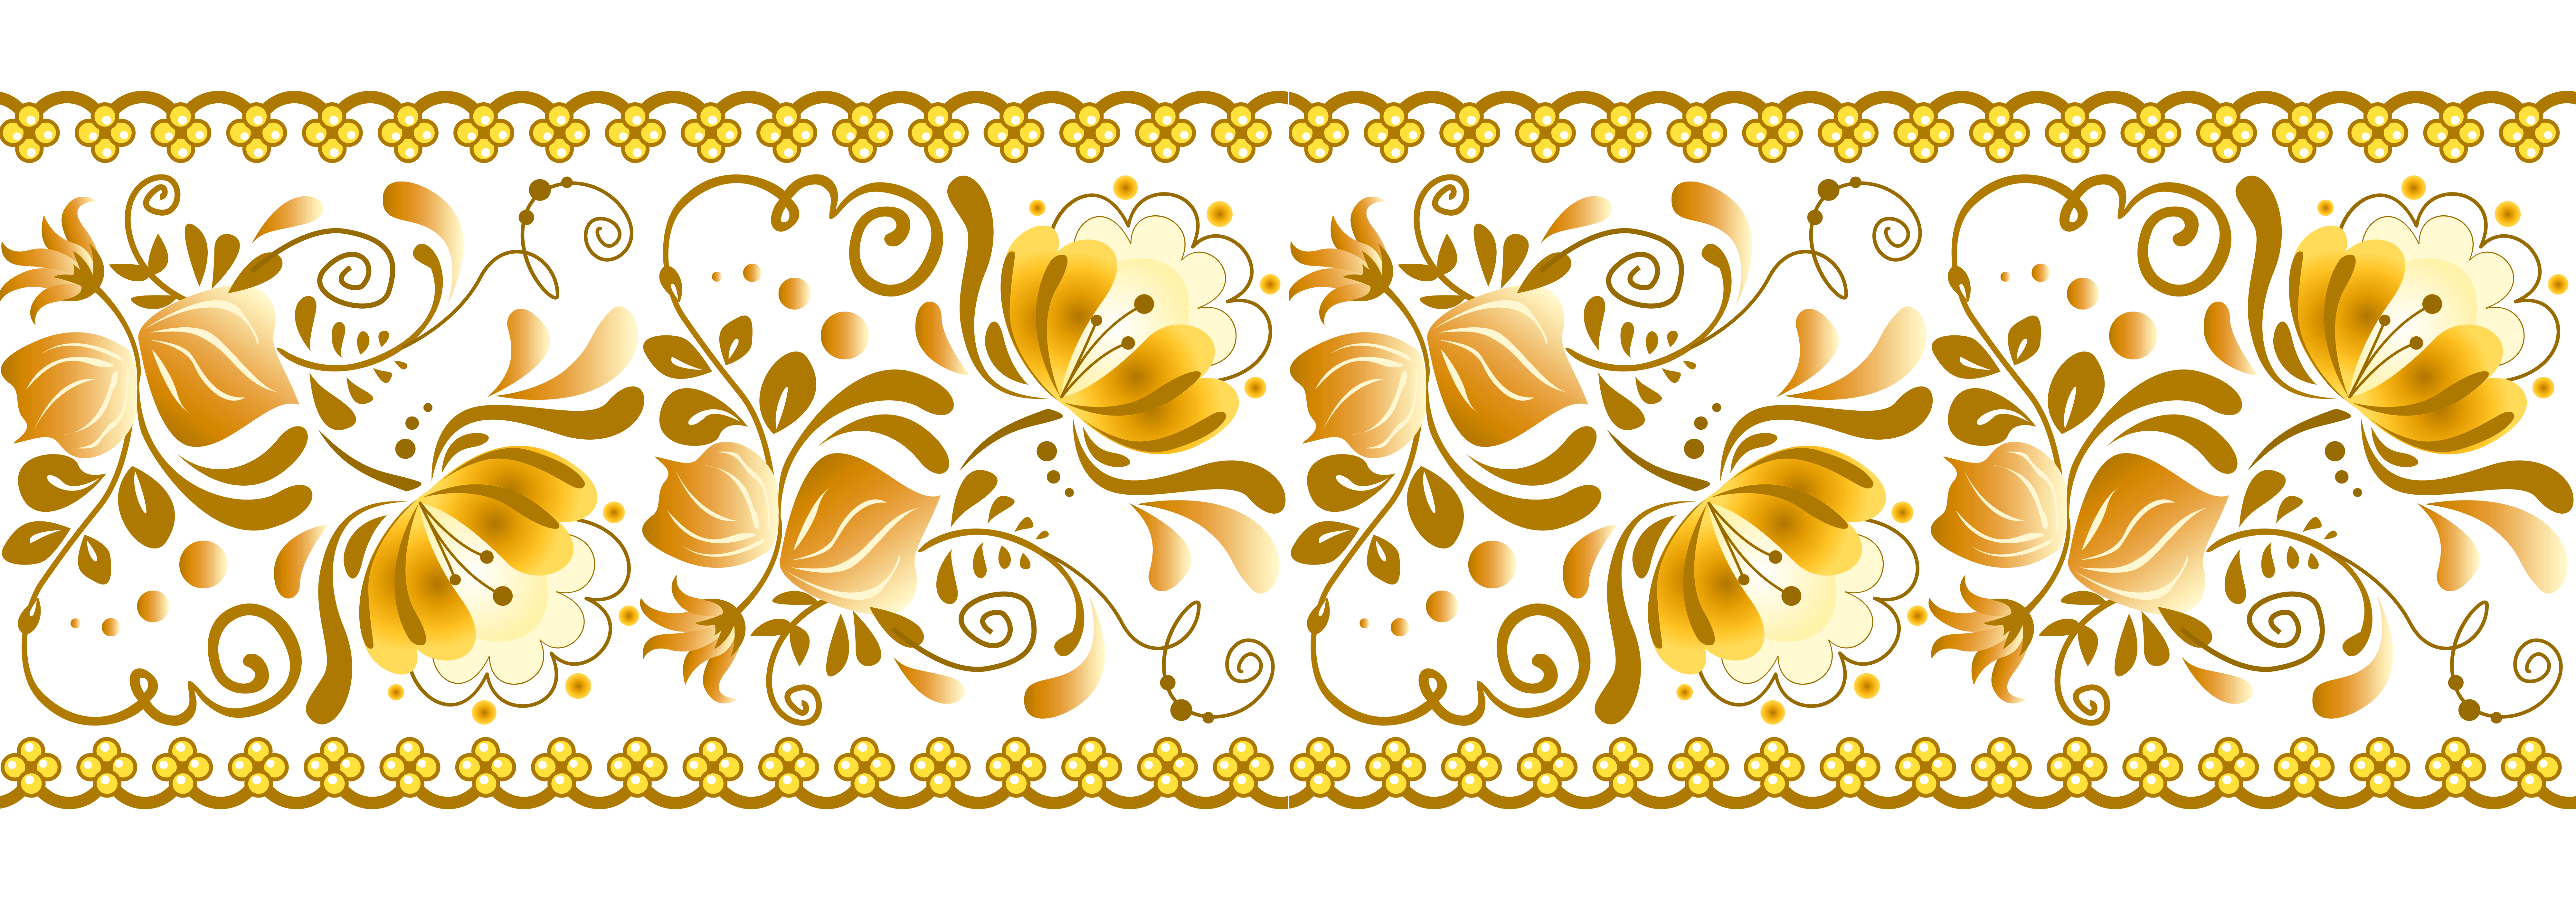 decor clipart png gallery